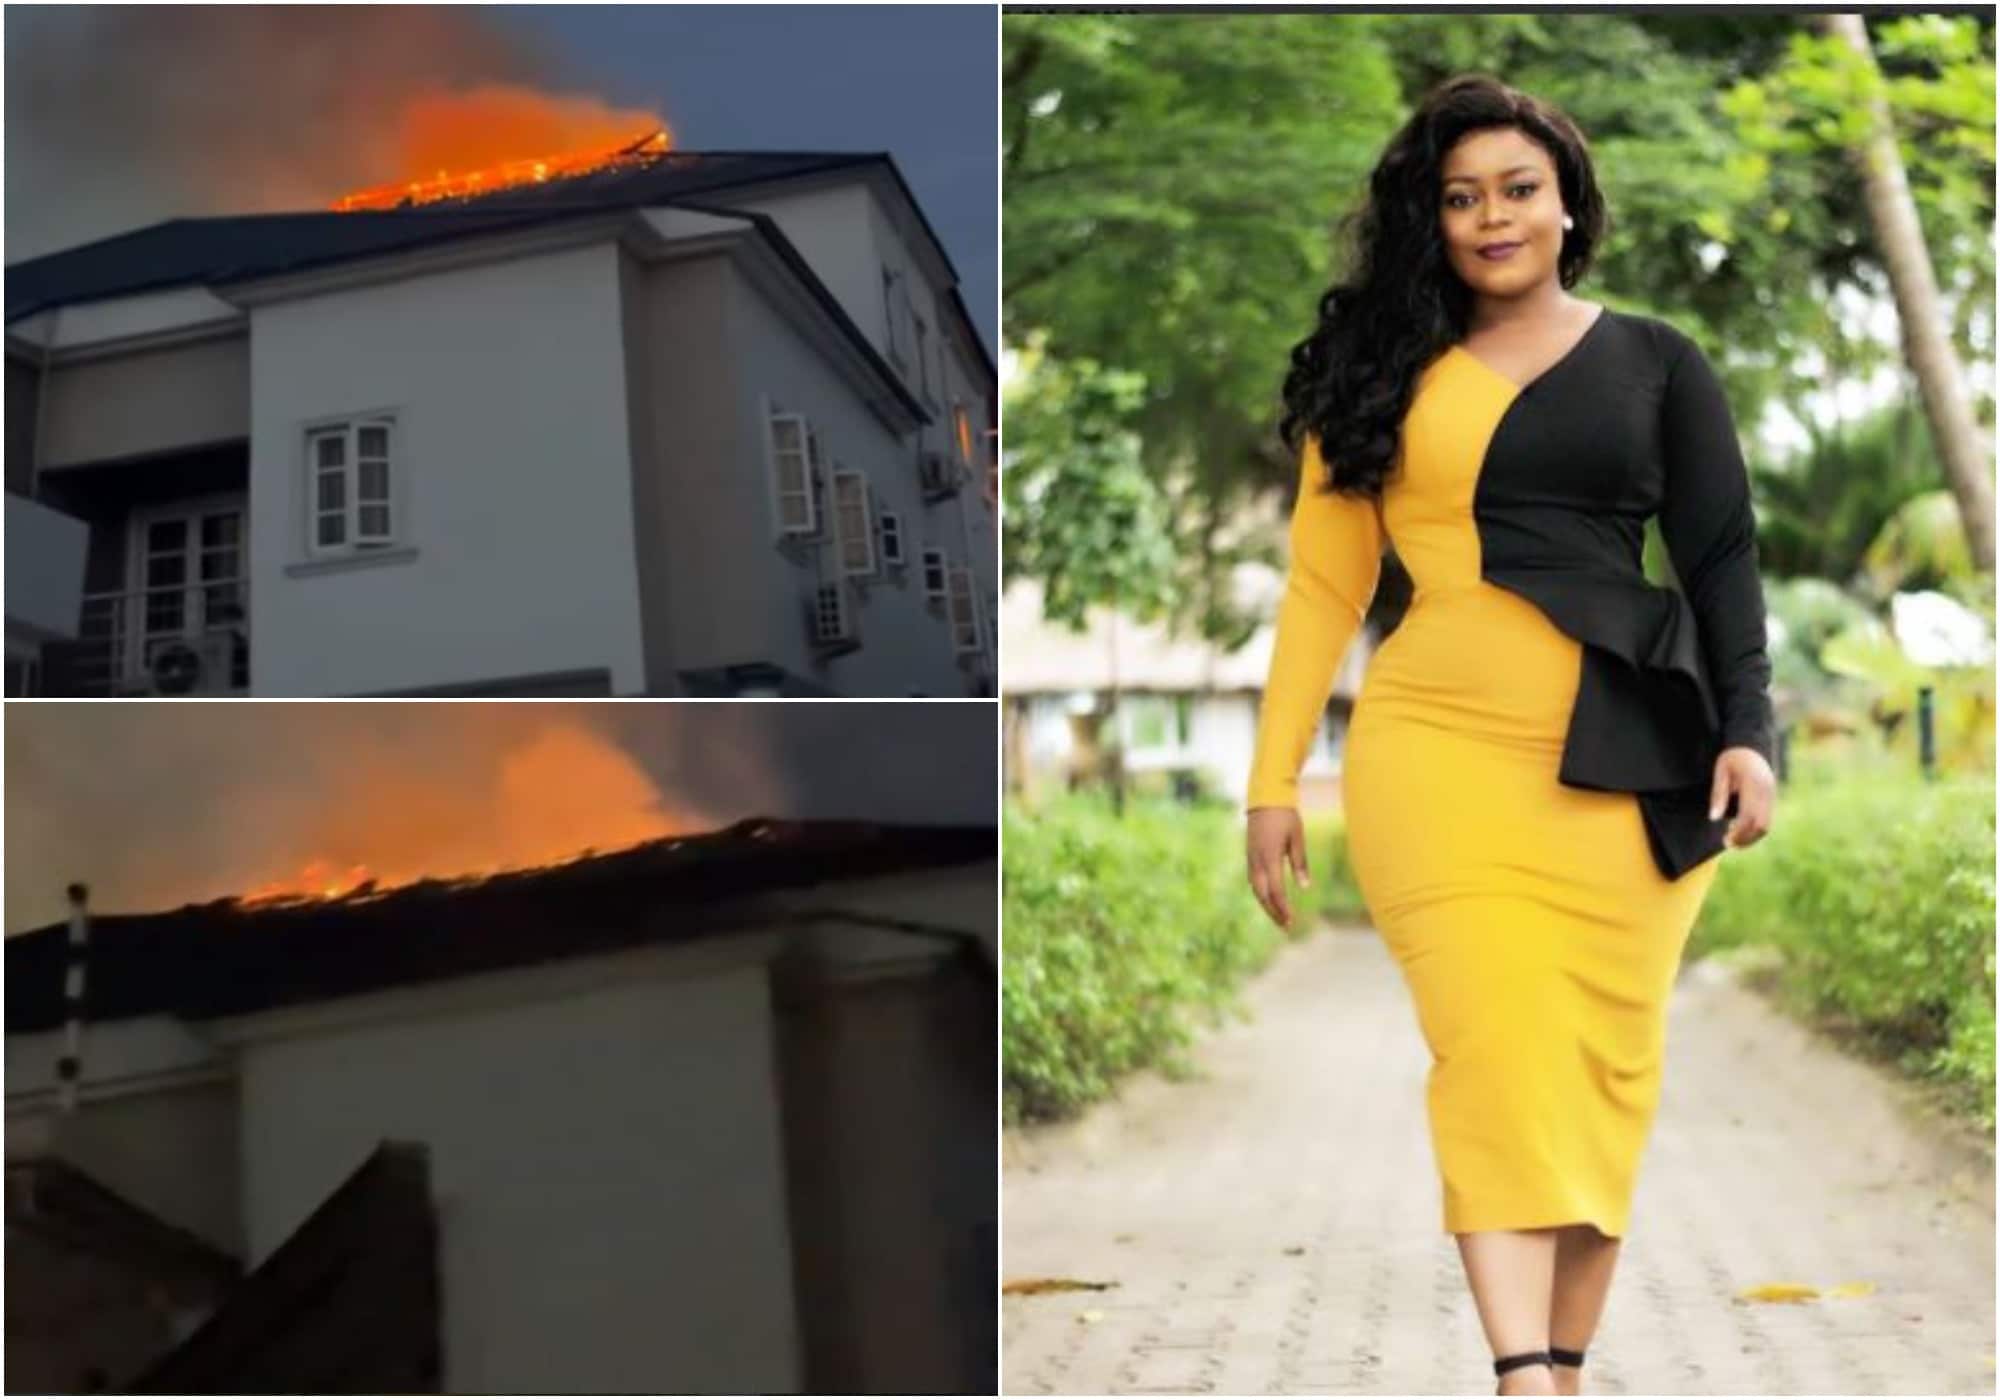 Didi Ekanem crying helplessly as her house, properties burn to Ashes in Lagos